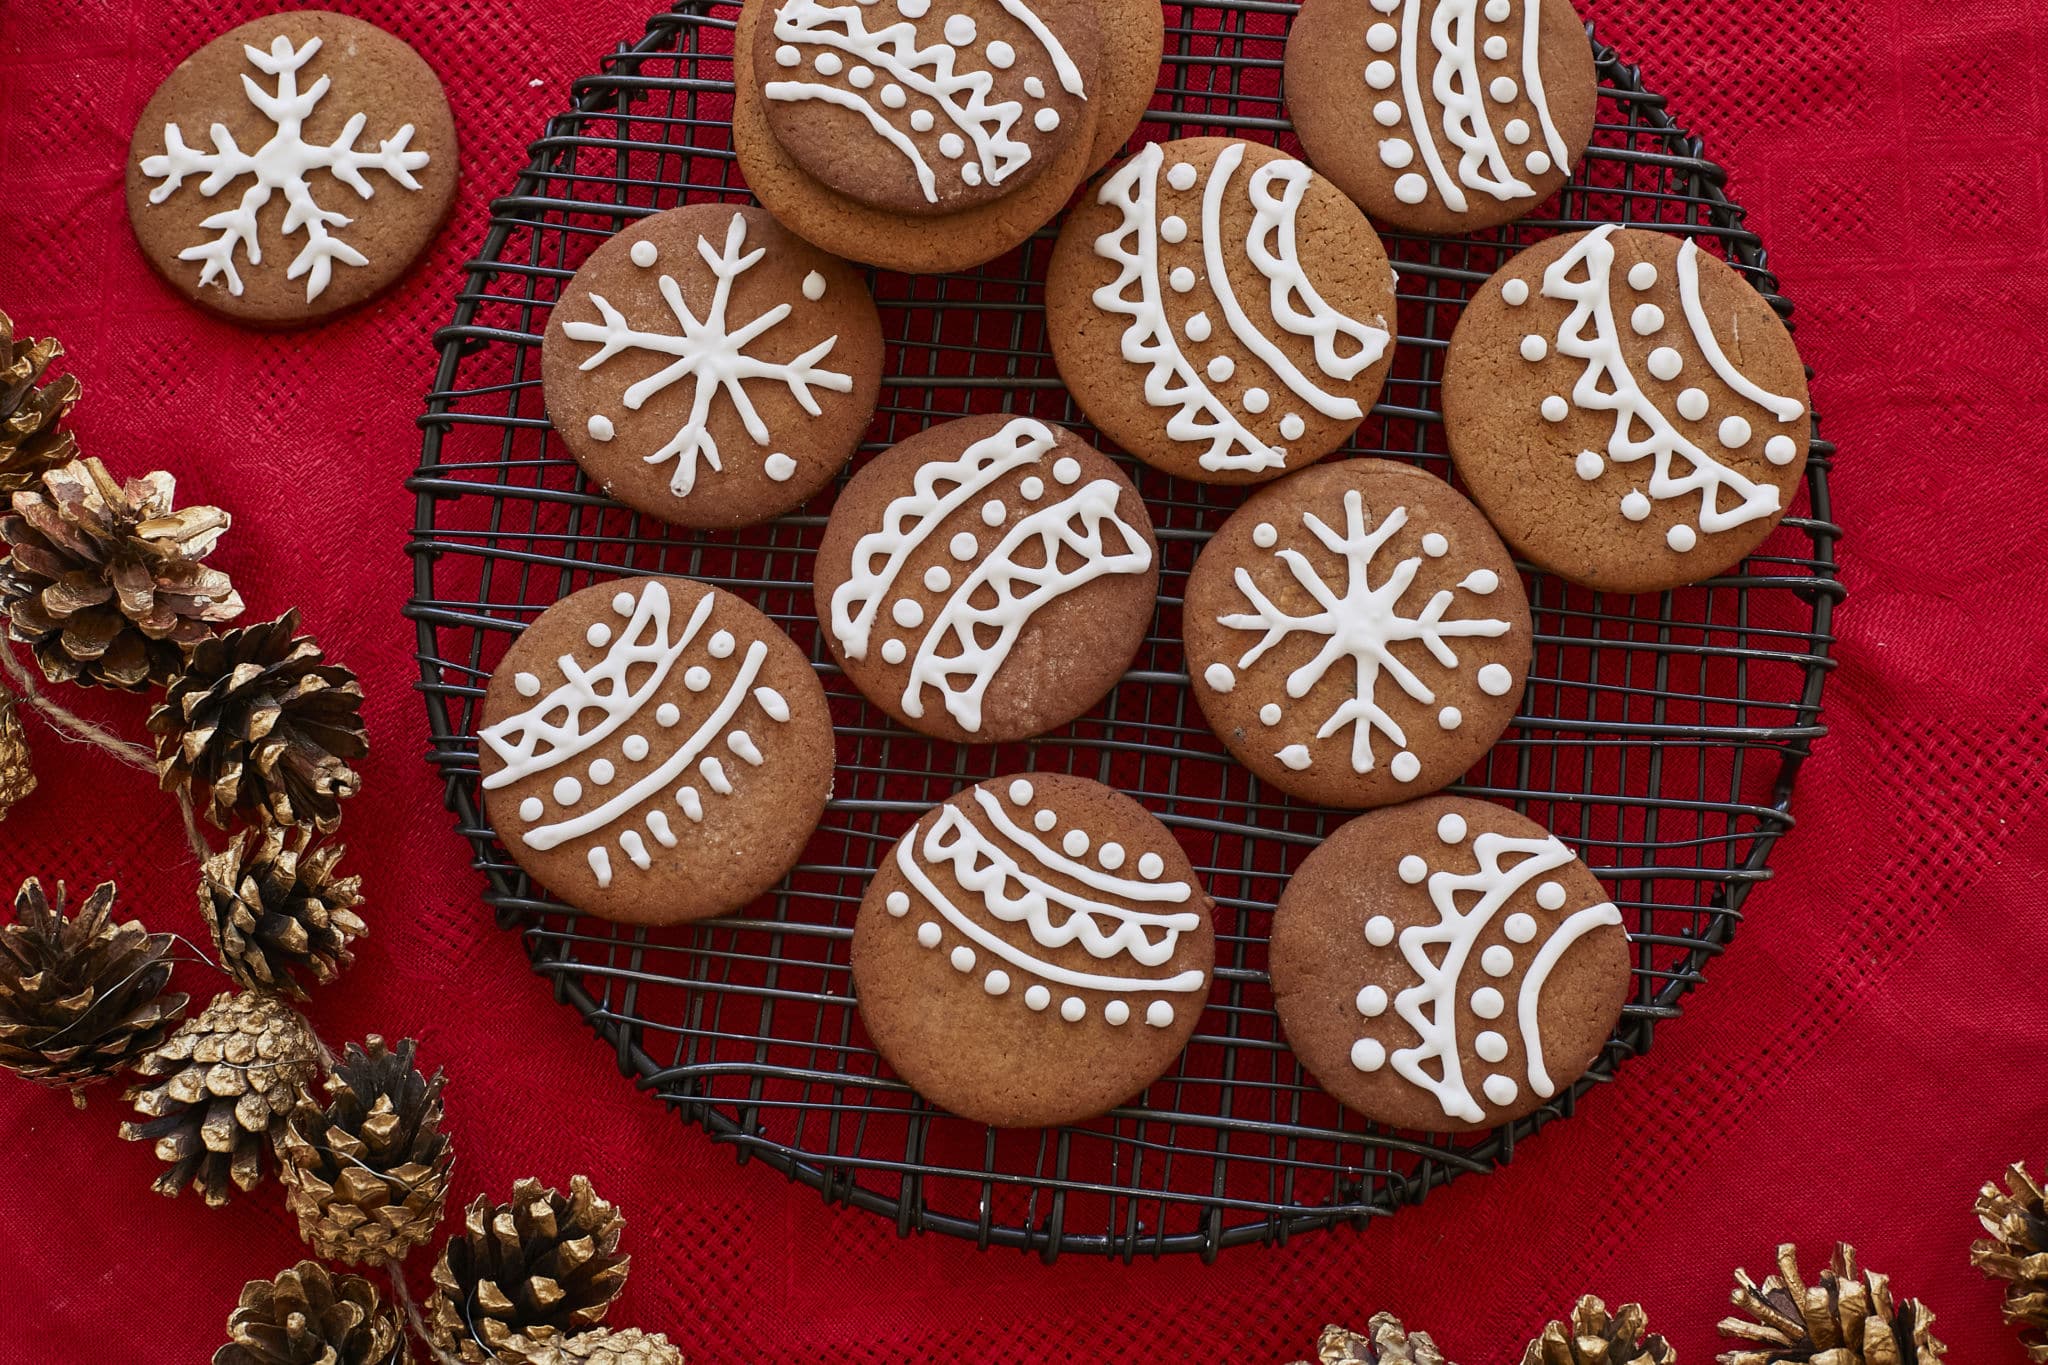 Homemade Pepparkakor, or Swedish Ginger Snaps, are presented on a black wire tray, decorated with festive Christmas icing, including snowflakes and ornaments.